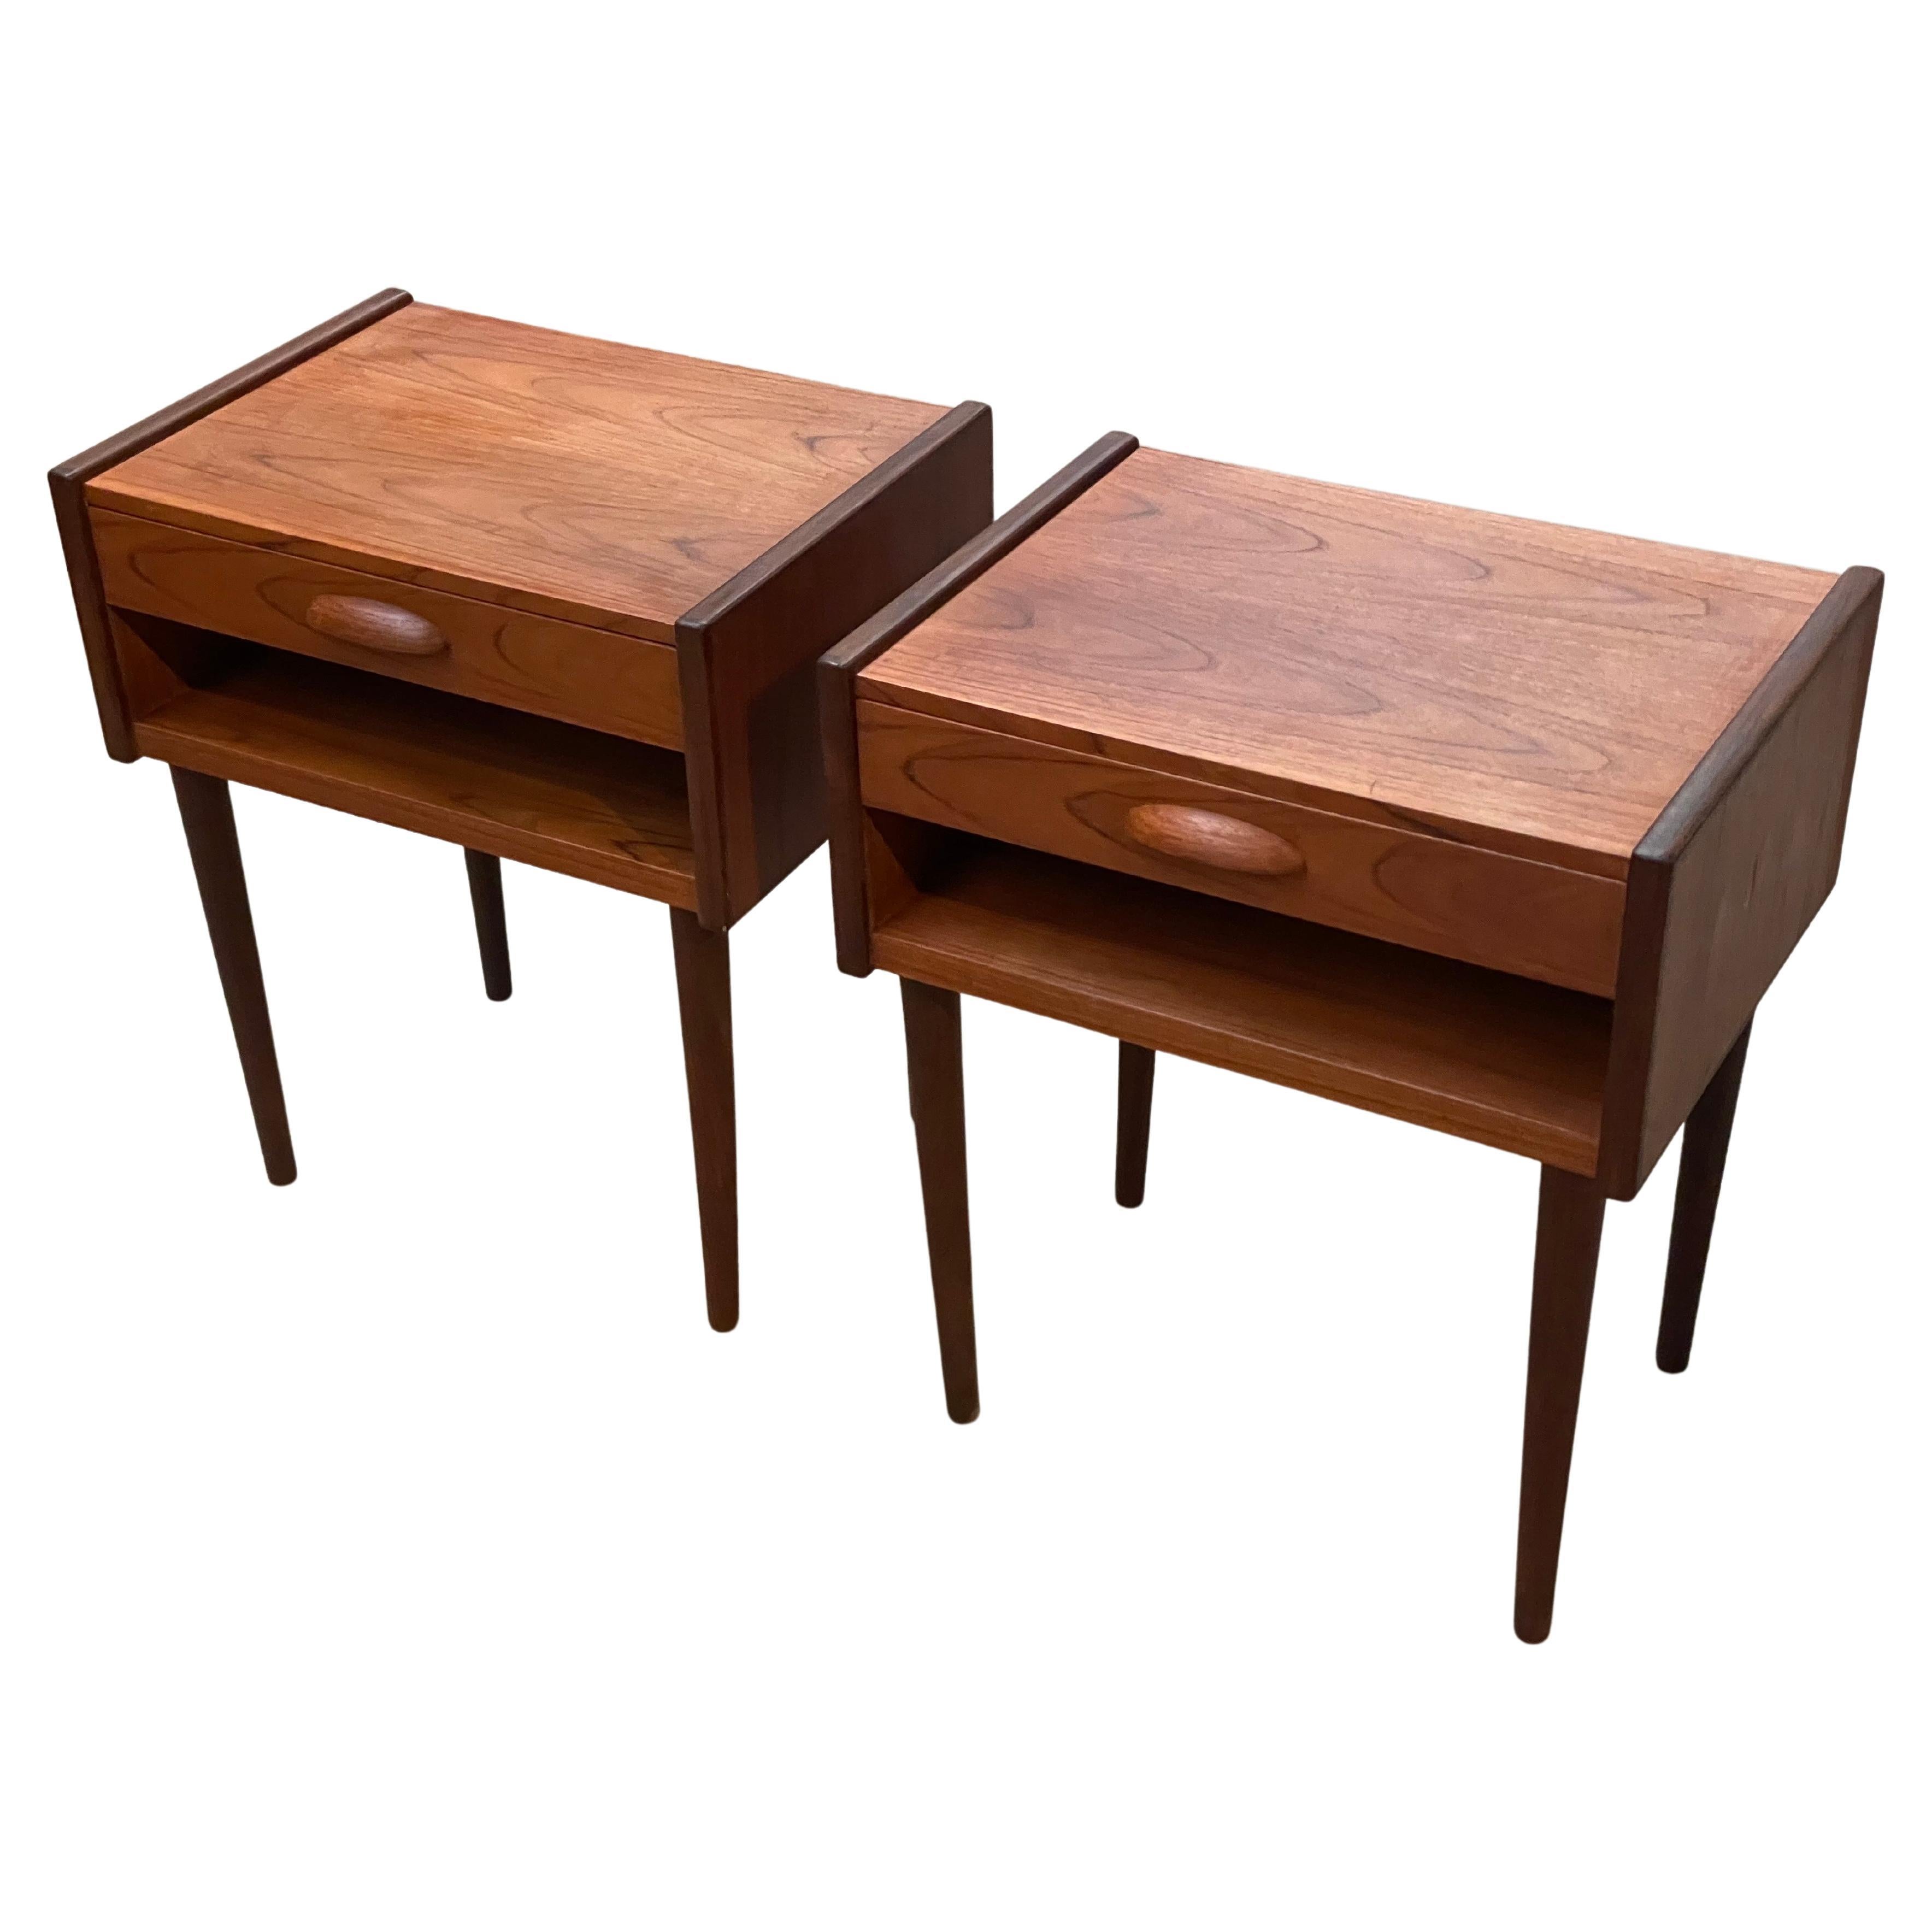 A beautiful set of Danish Mid century modern teak night stands from the 1960´s